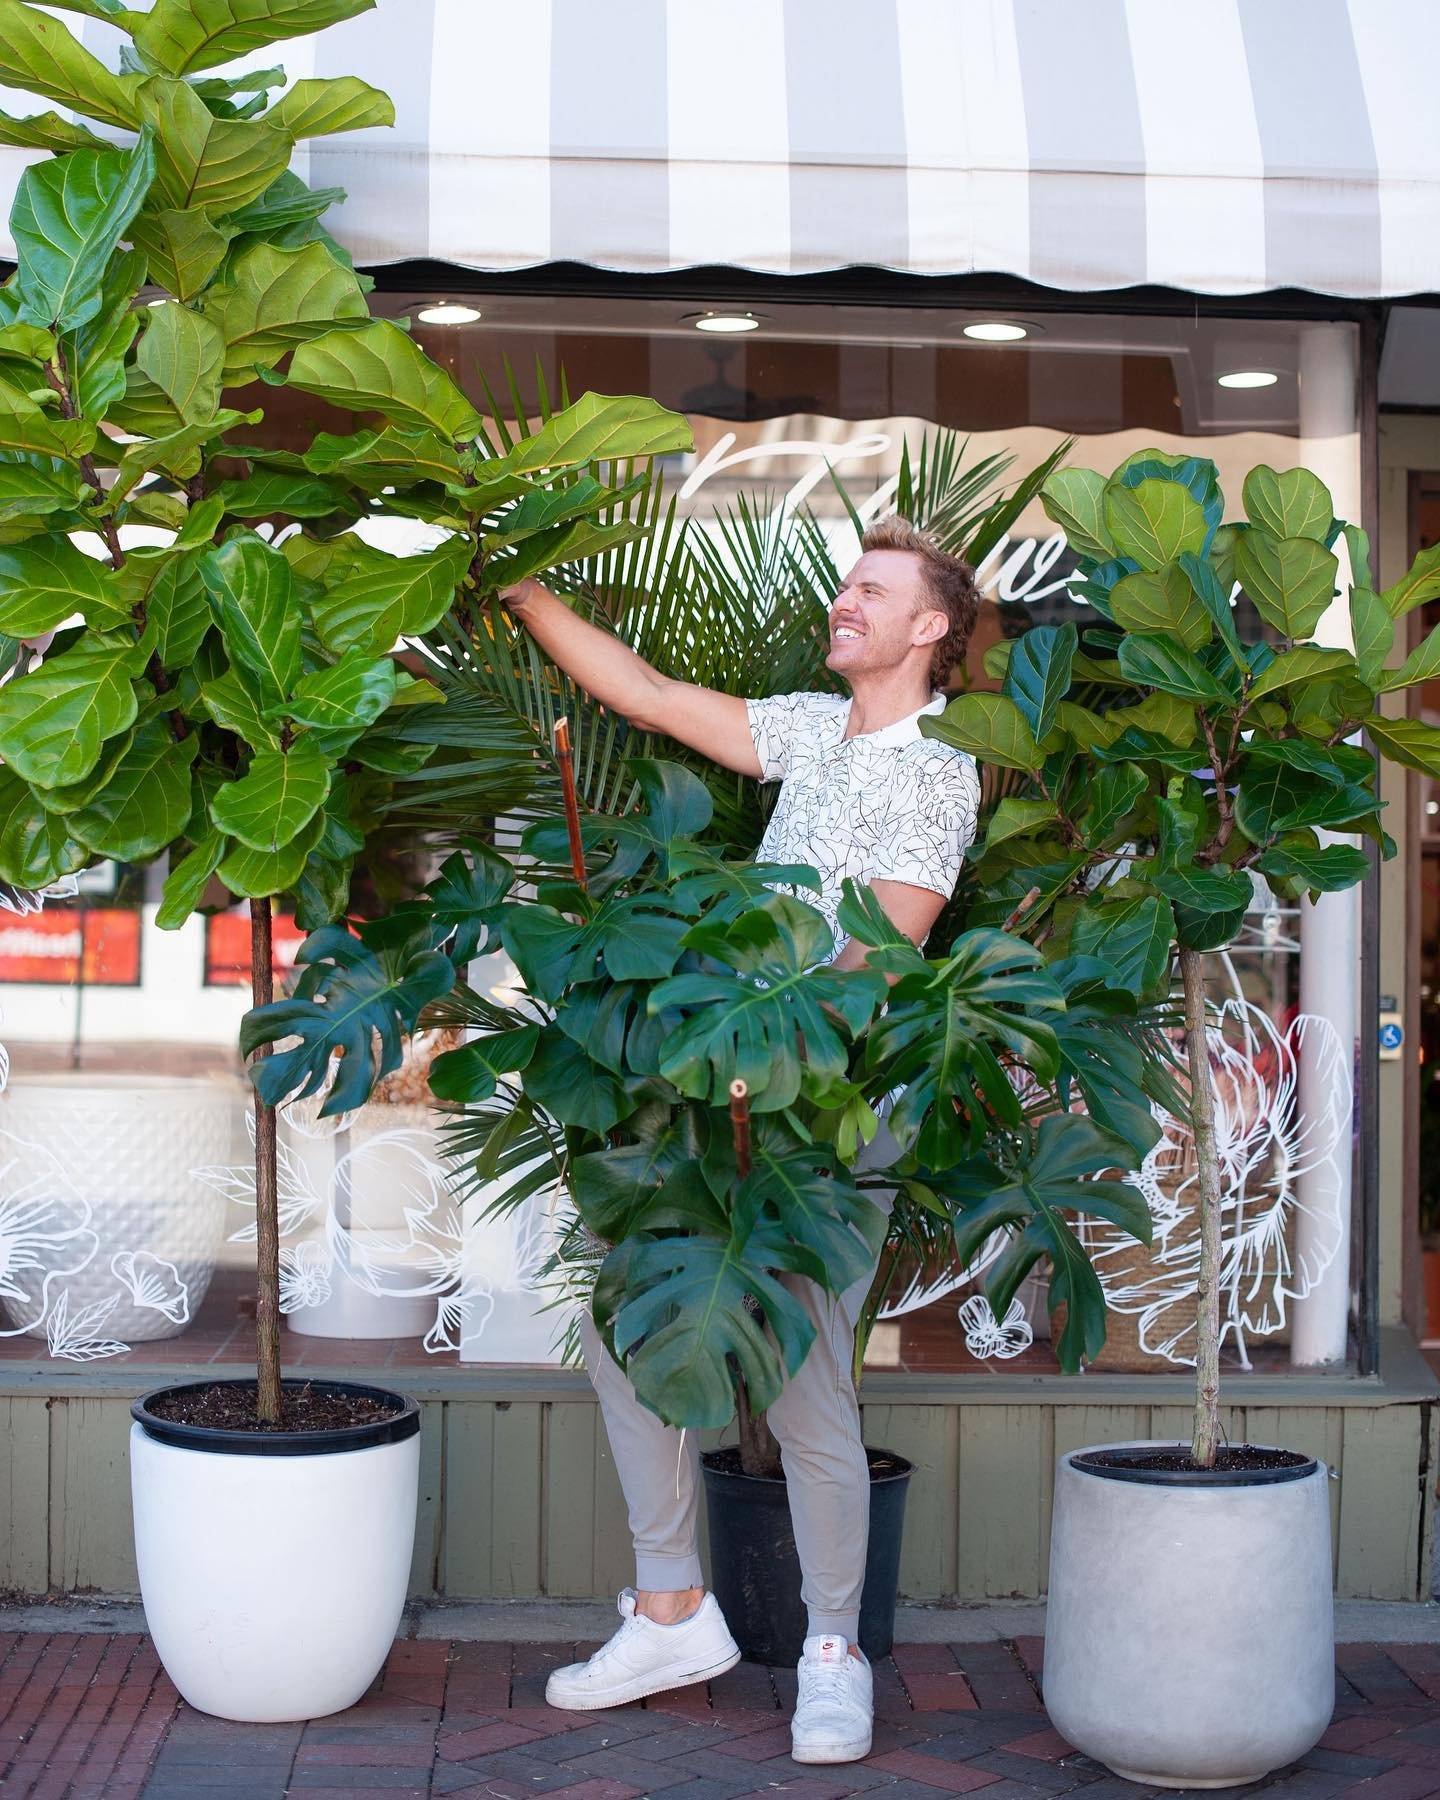 Warmer days means a fresh restock in large tropical plants!!! We got everything from stunning monsteras and bird of paradise to 9 ft fiddle leaf trees! Come on in and we can help you evaluate your lighting conditions and find the perfect fit. No hous